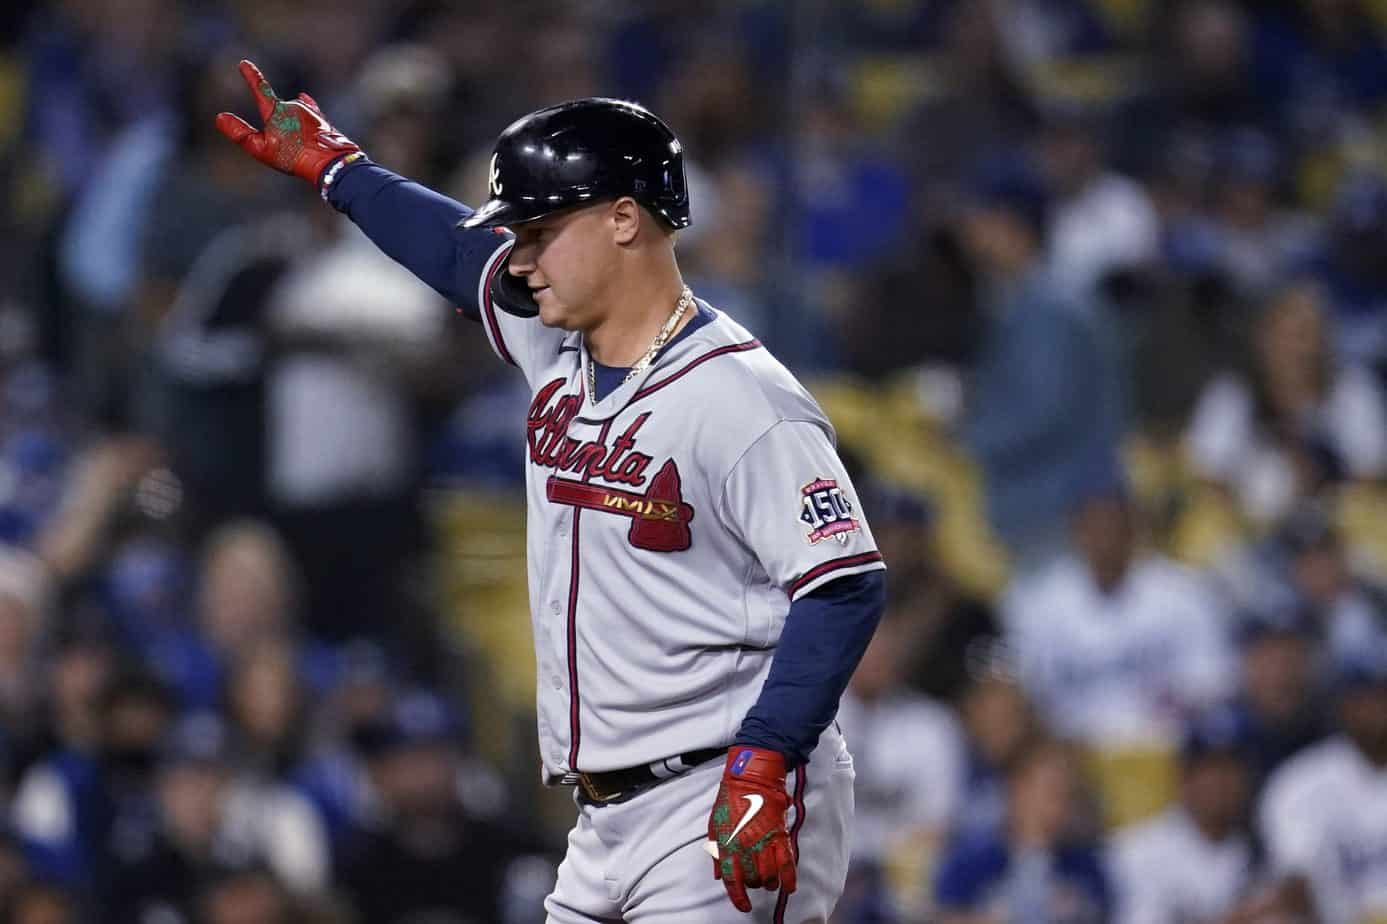 Atlanta Braves outfielder Joc Pederson stole the show during the team's Championship Parade and rally on Friday afternoon